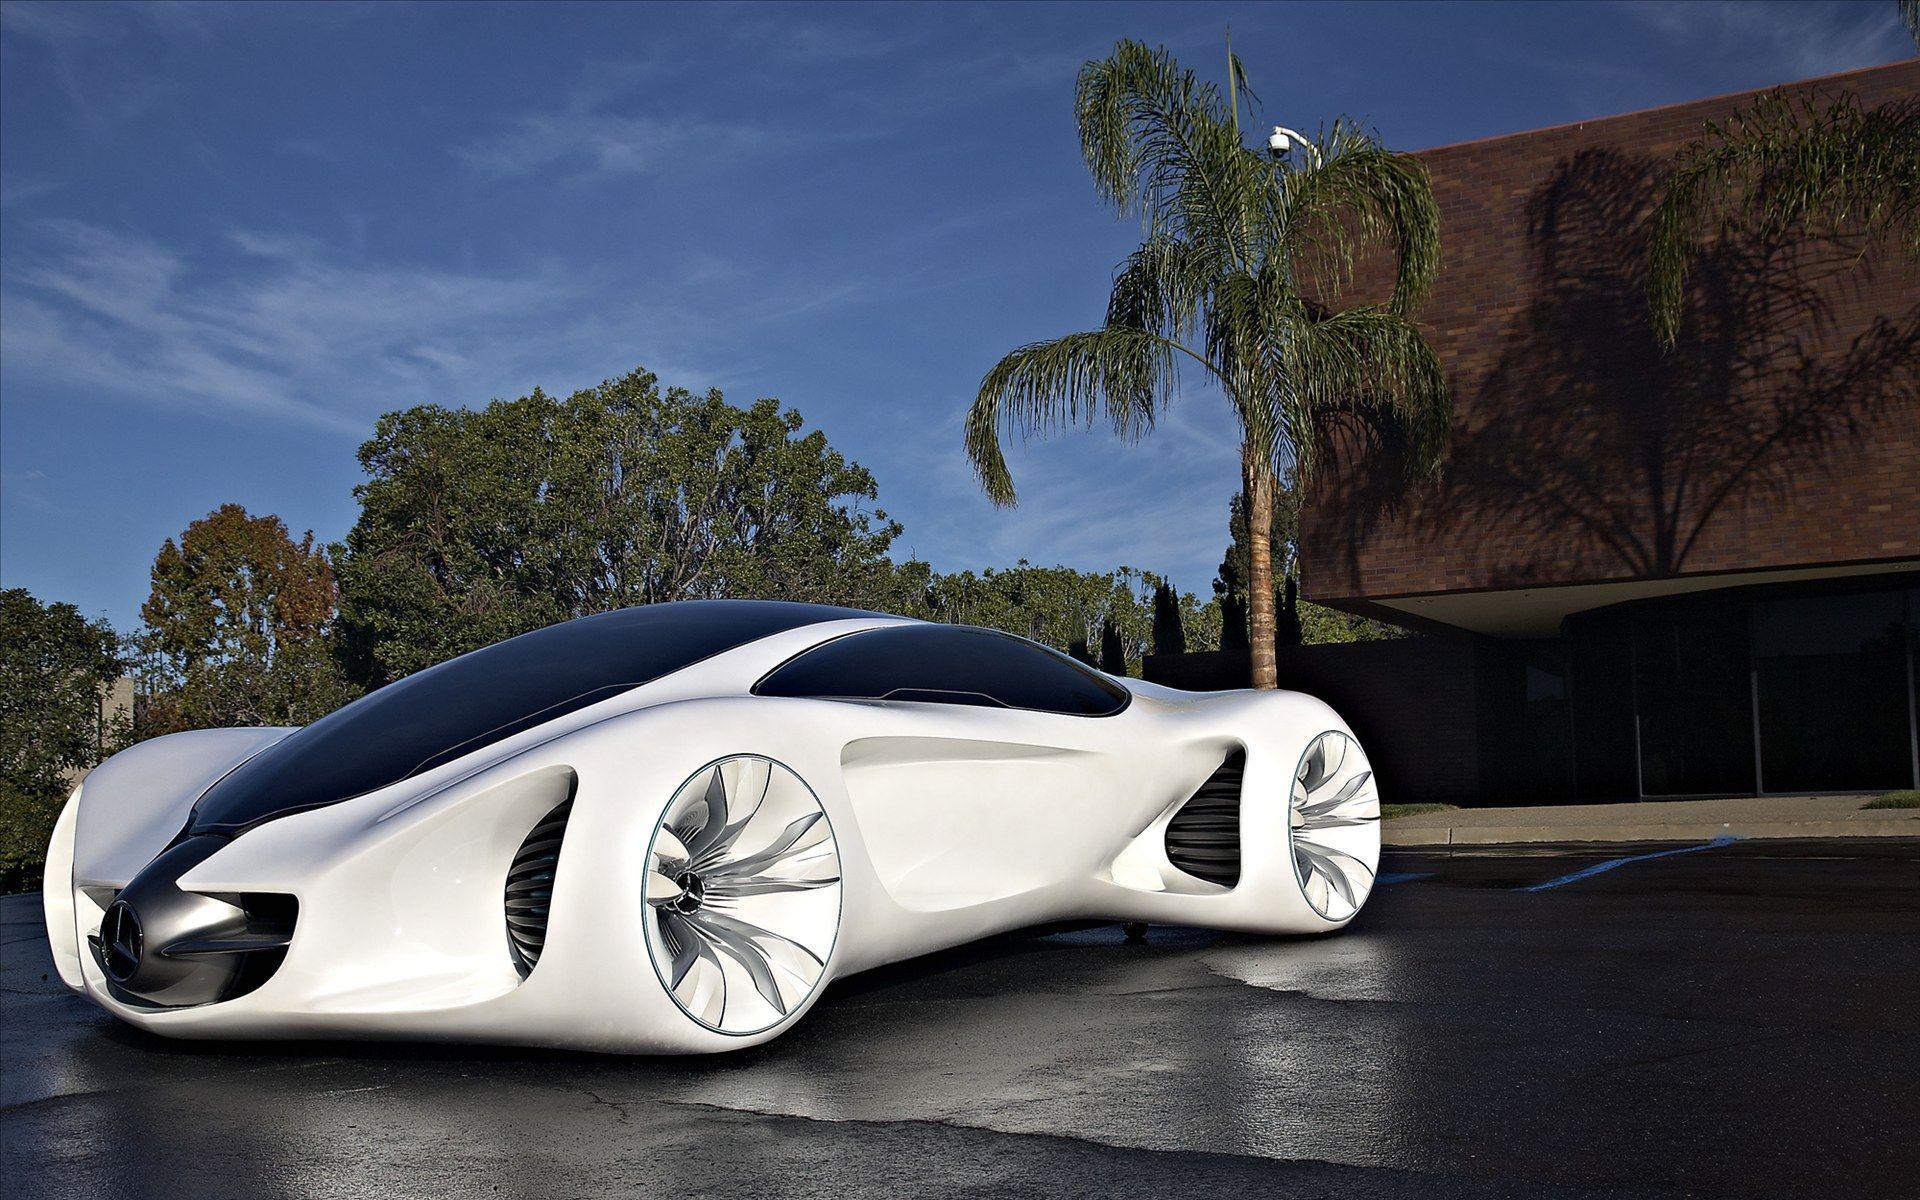 Mercedes Benz Biome Concept Do You Like This Cool Car? Find Out